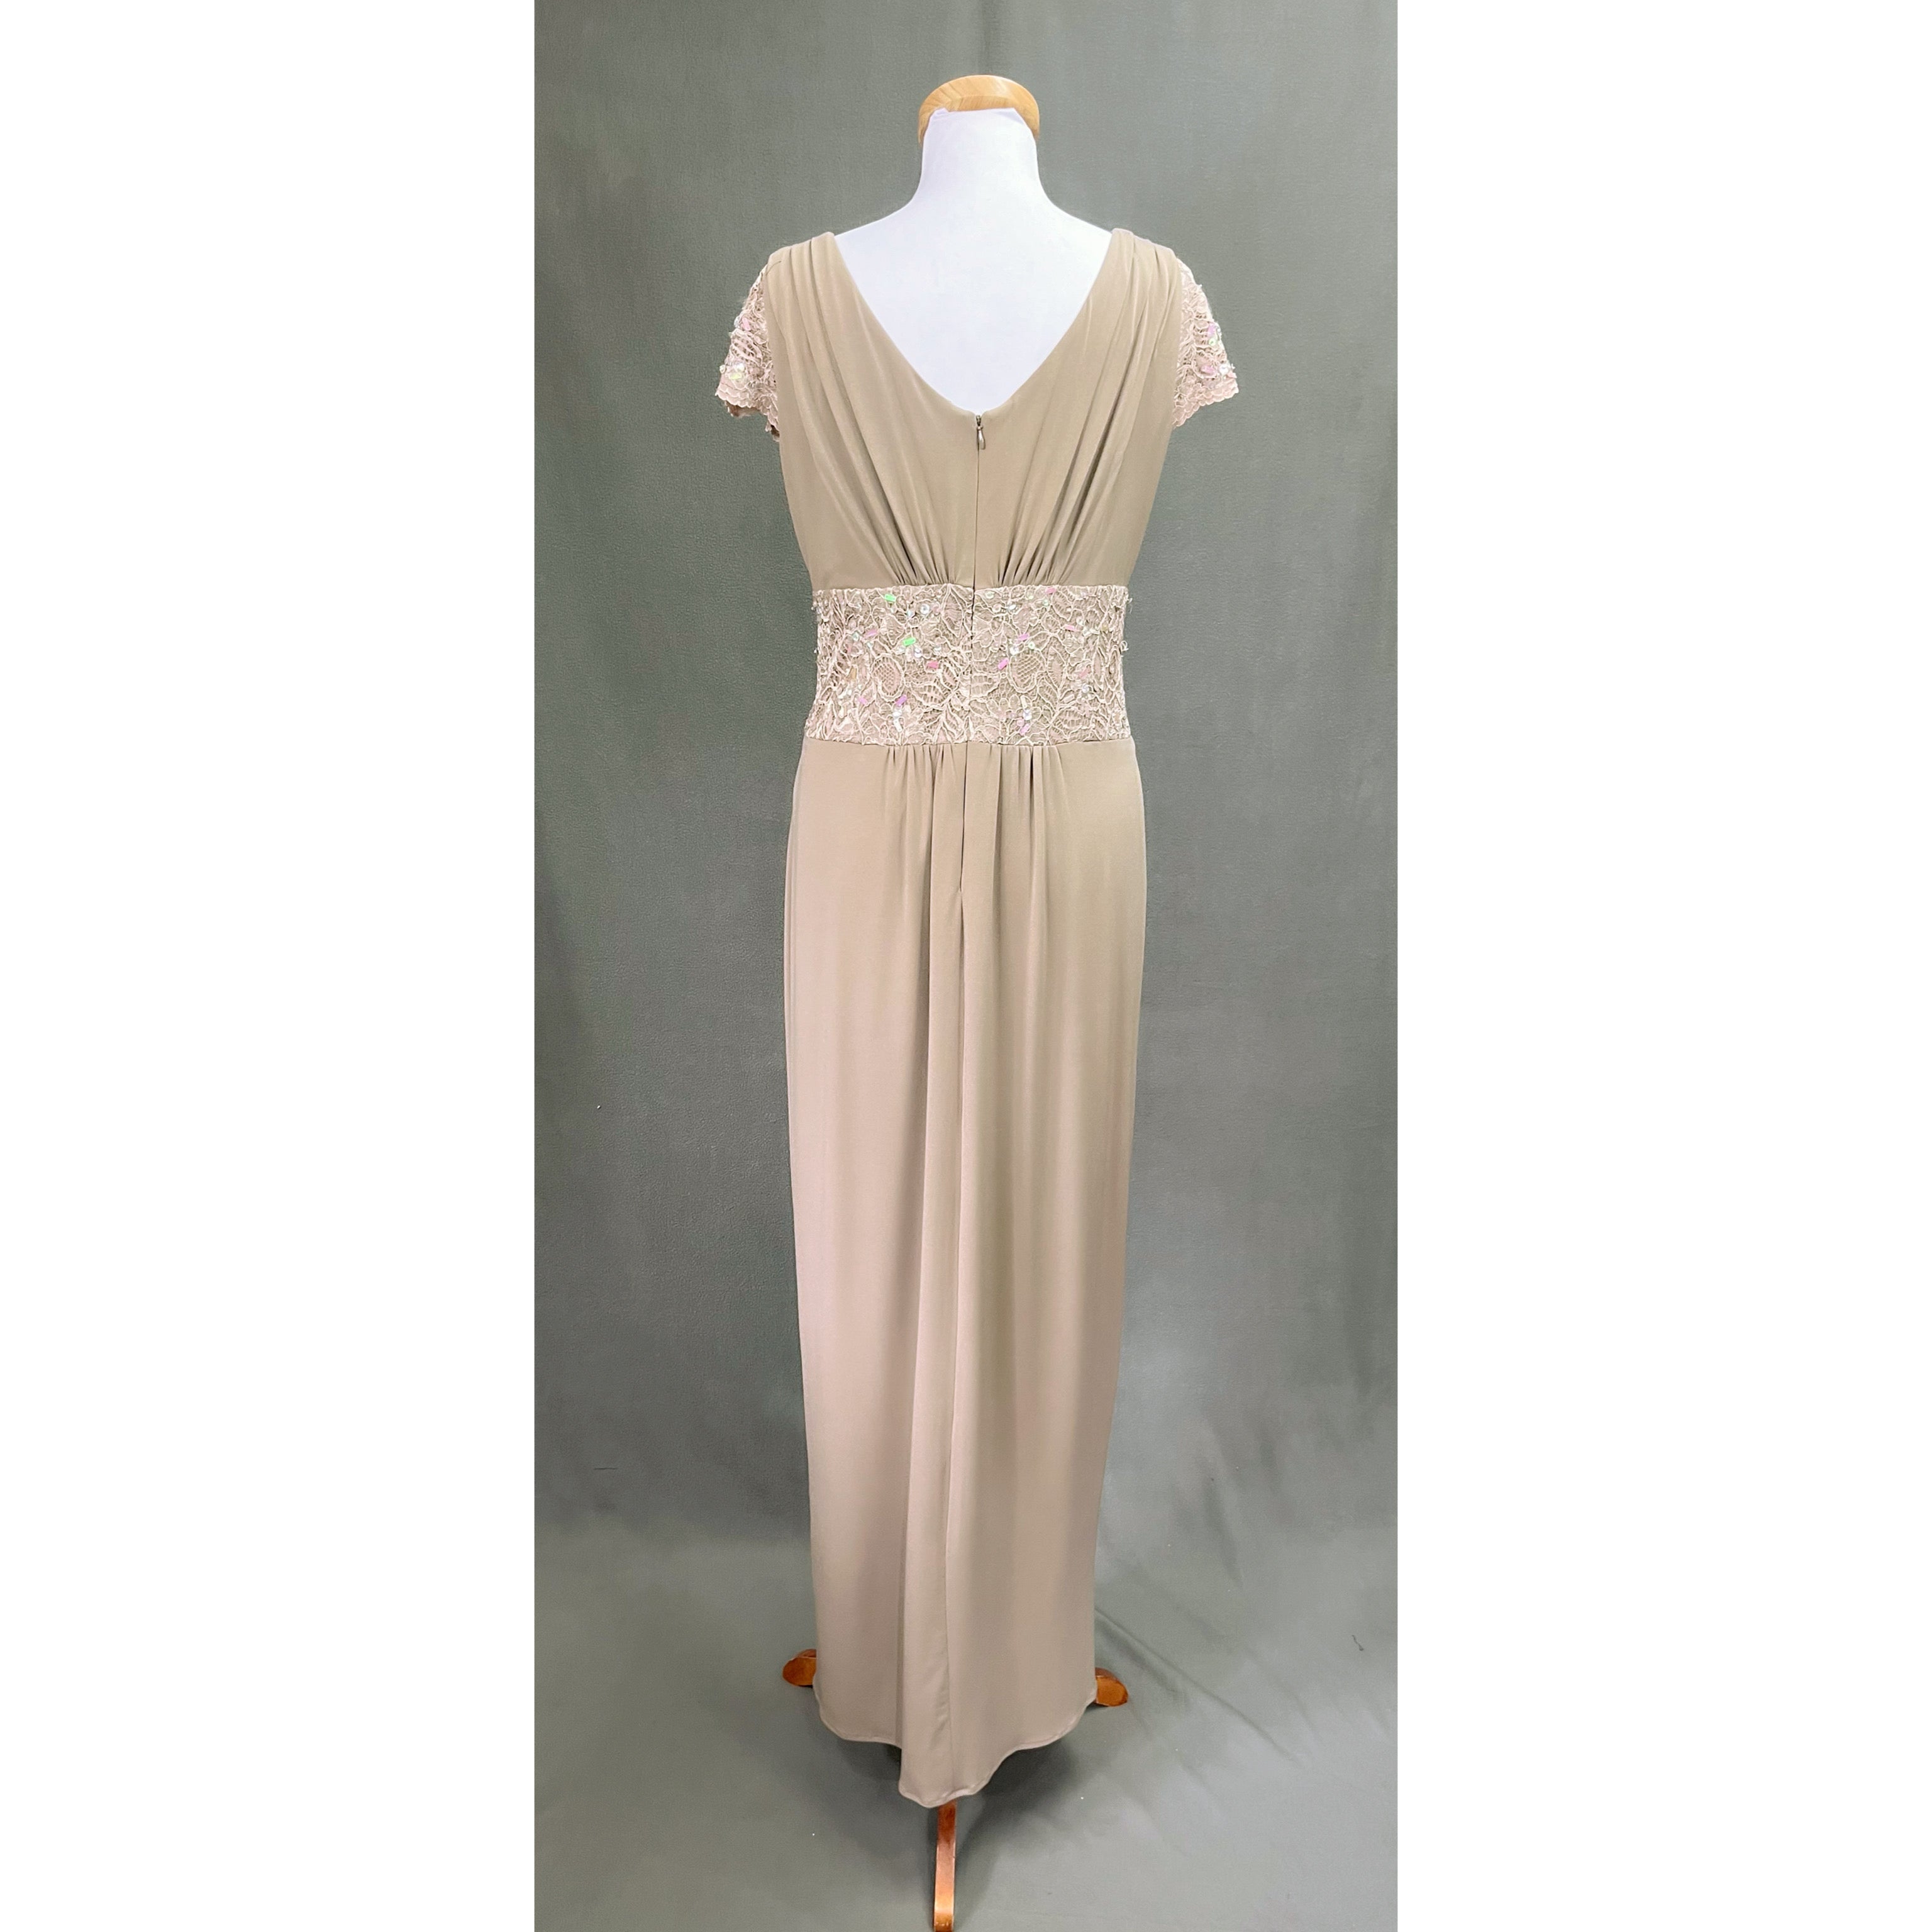 KM Collections champagne dress, size 8, NEW WITH TAGS!